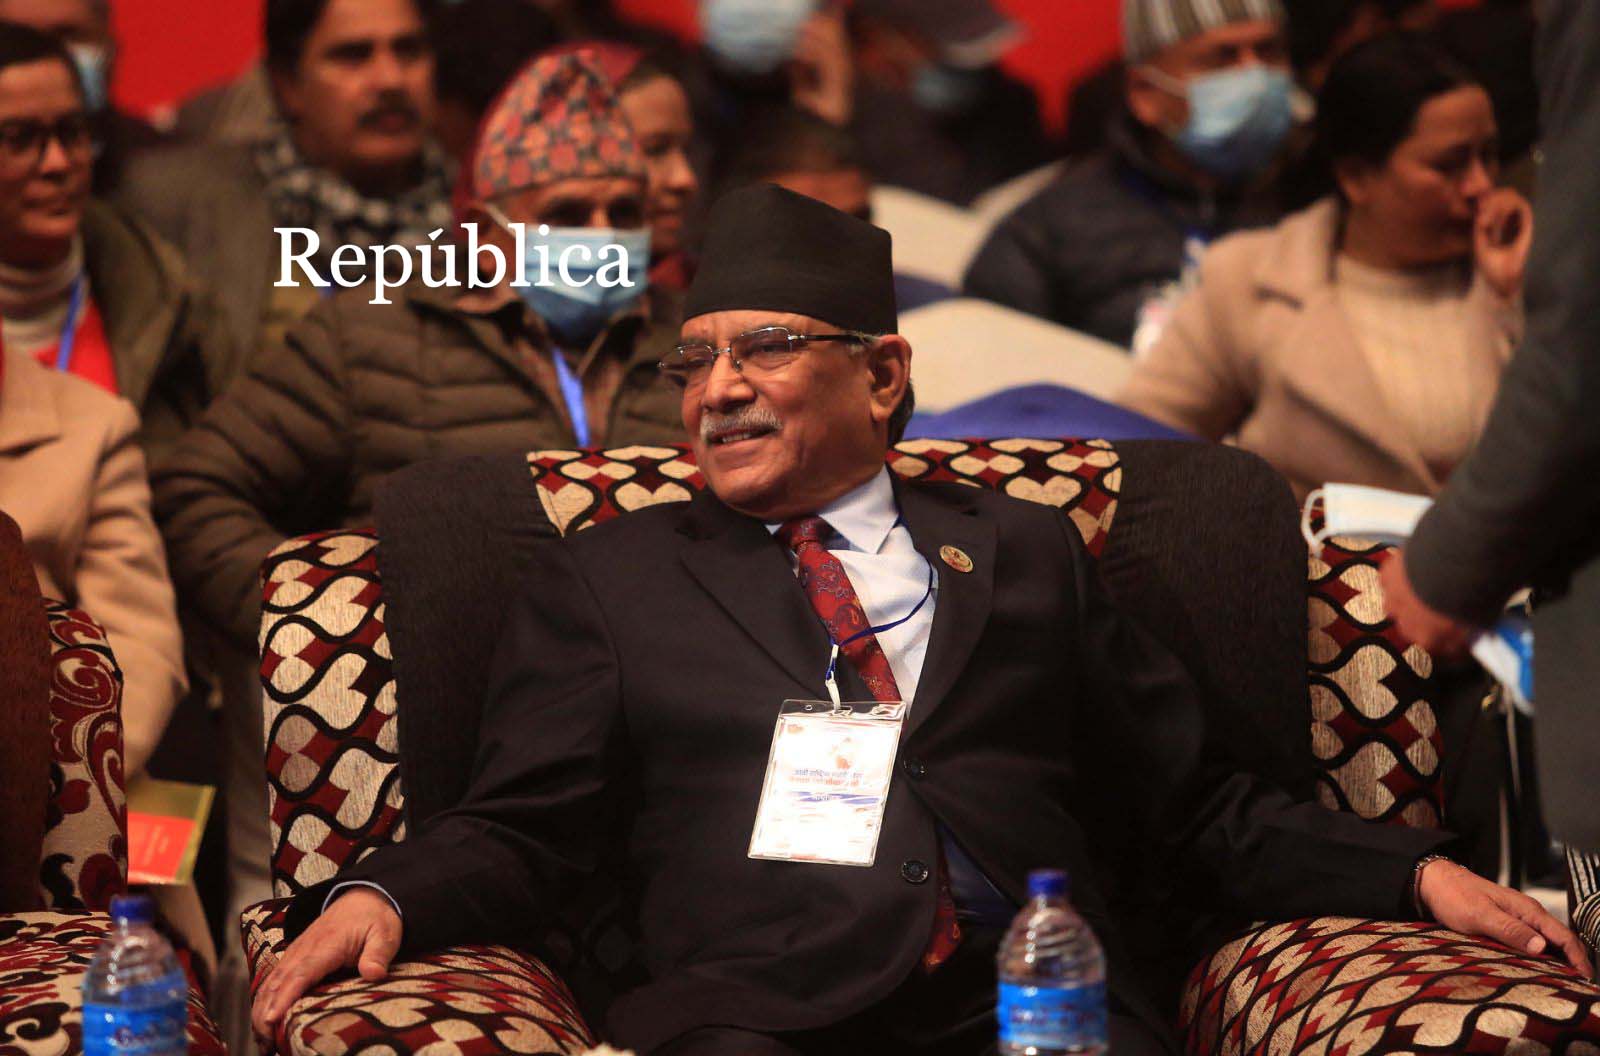 We are searching alternatives to protect alliance, resolve national problem: Chair Dahal